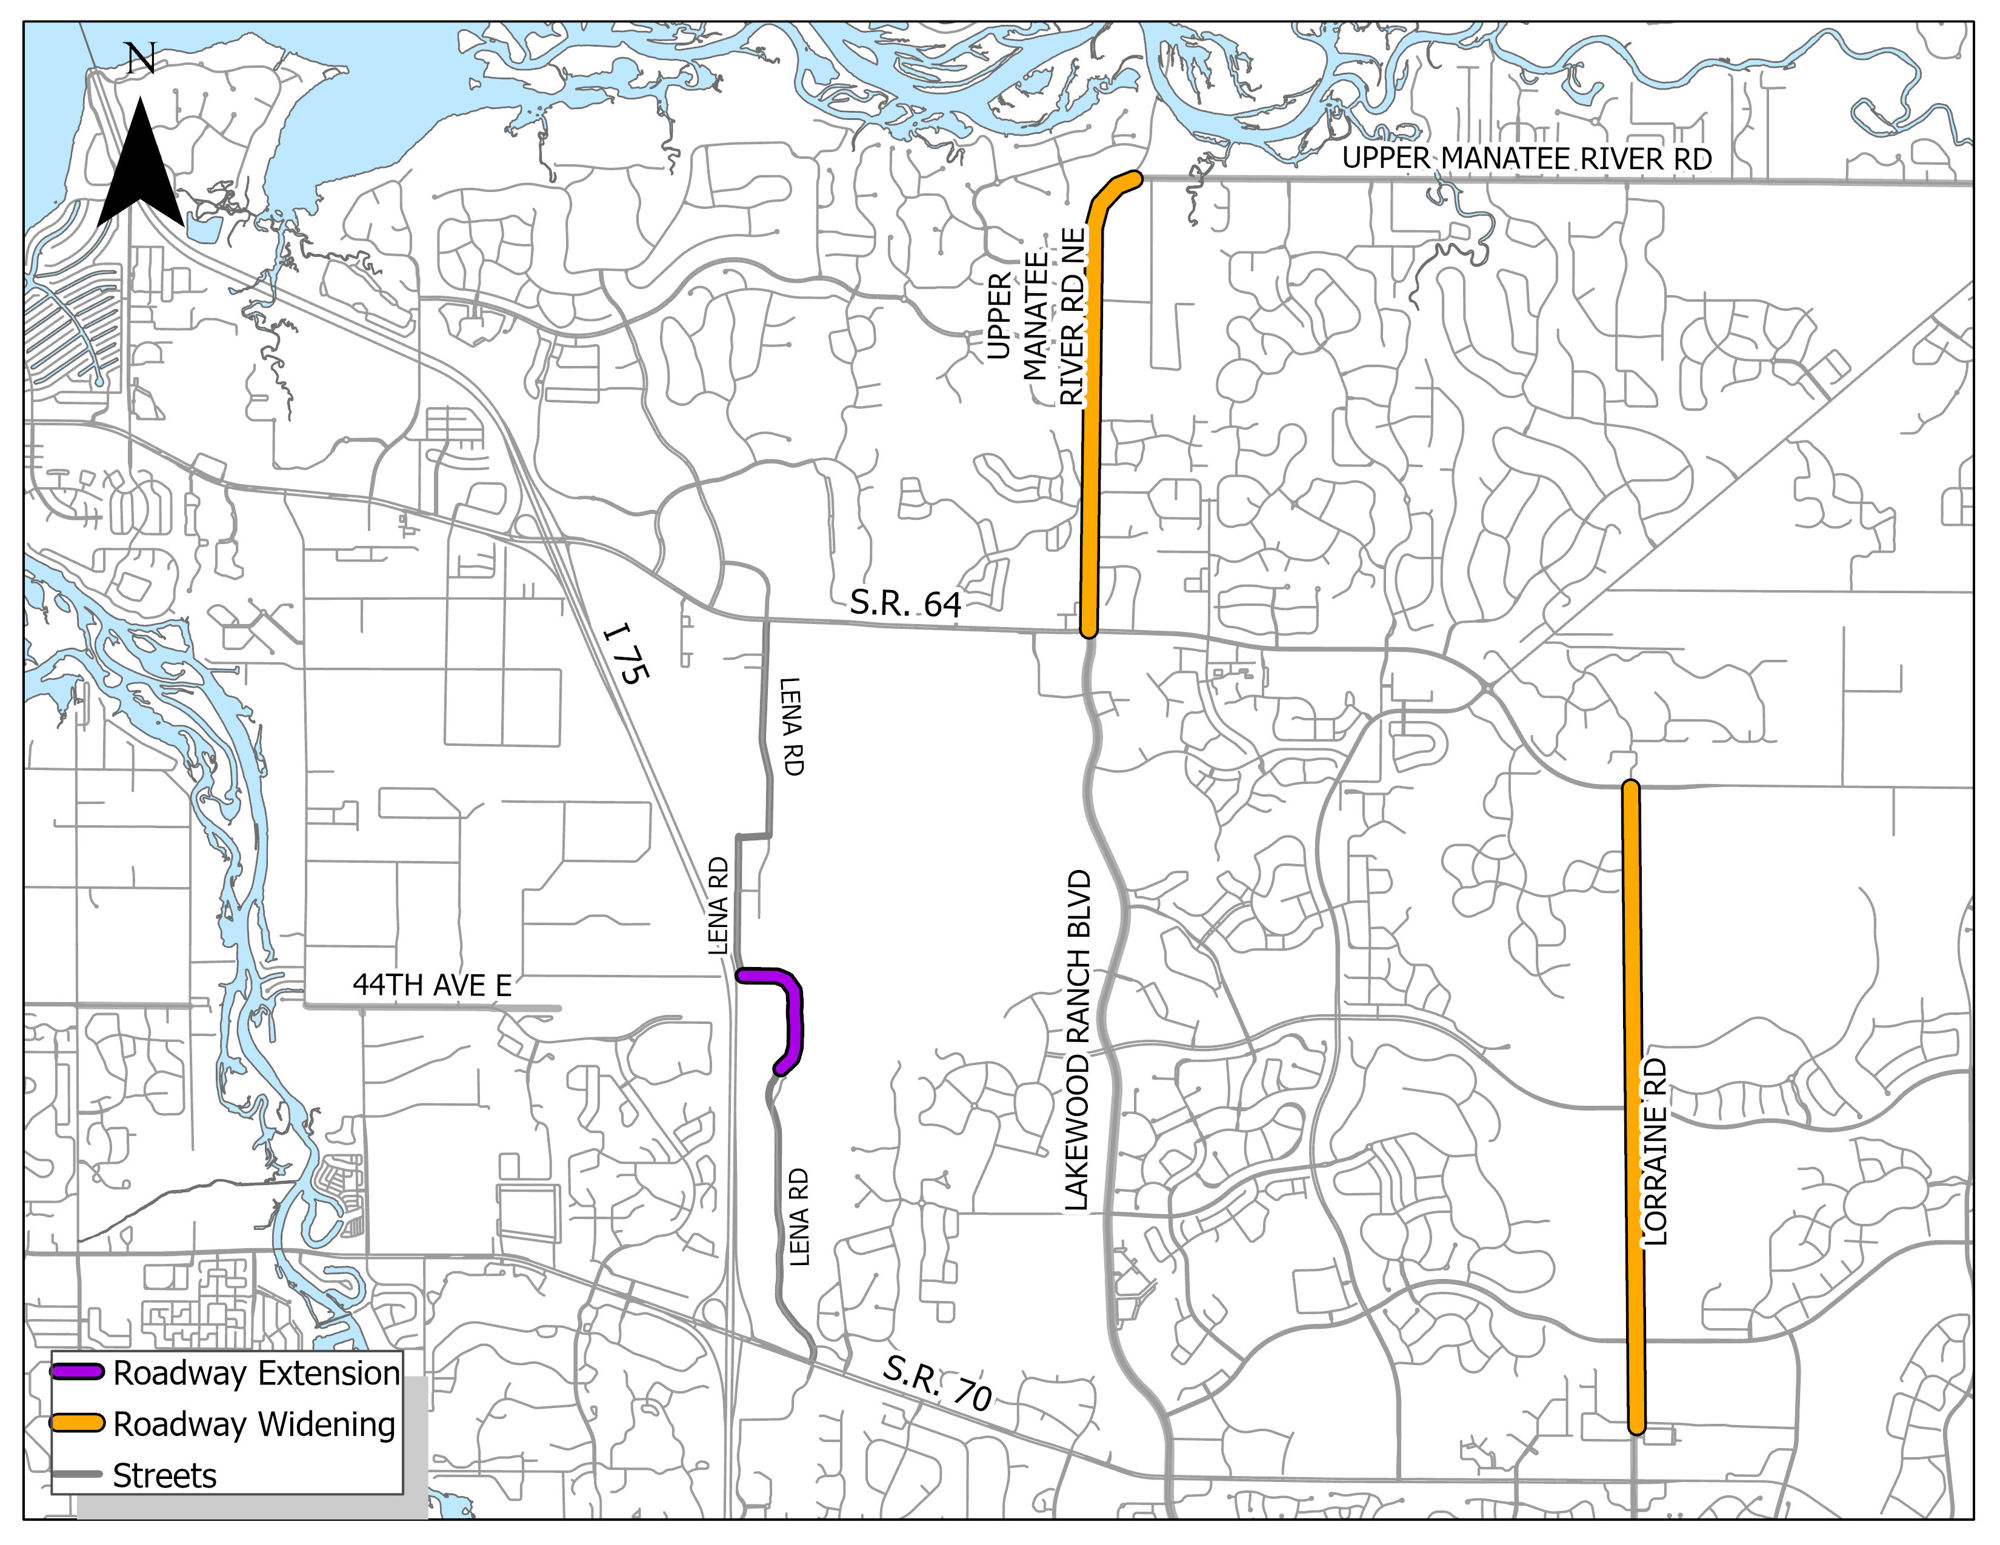 Manatee County commissioners prioritize three East County road projects that weren't previously on the county's five-year plan: widening for Lorraine Road and Upper Manatee River Road and extension for Lena Road.